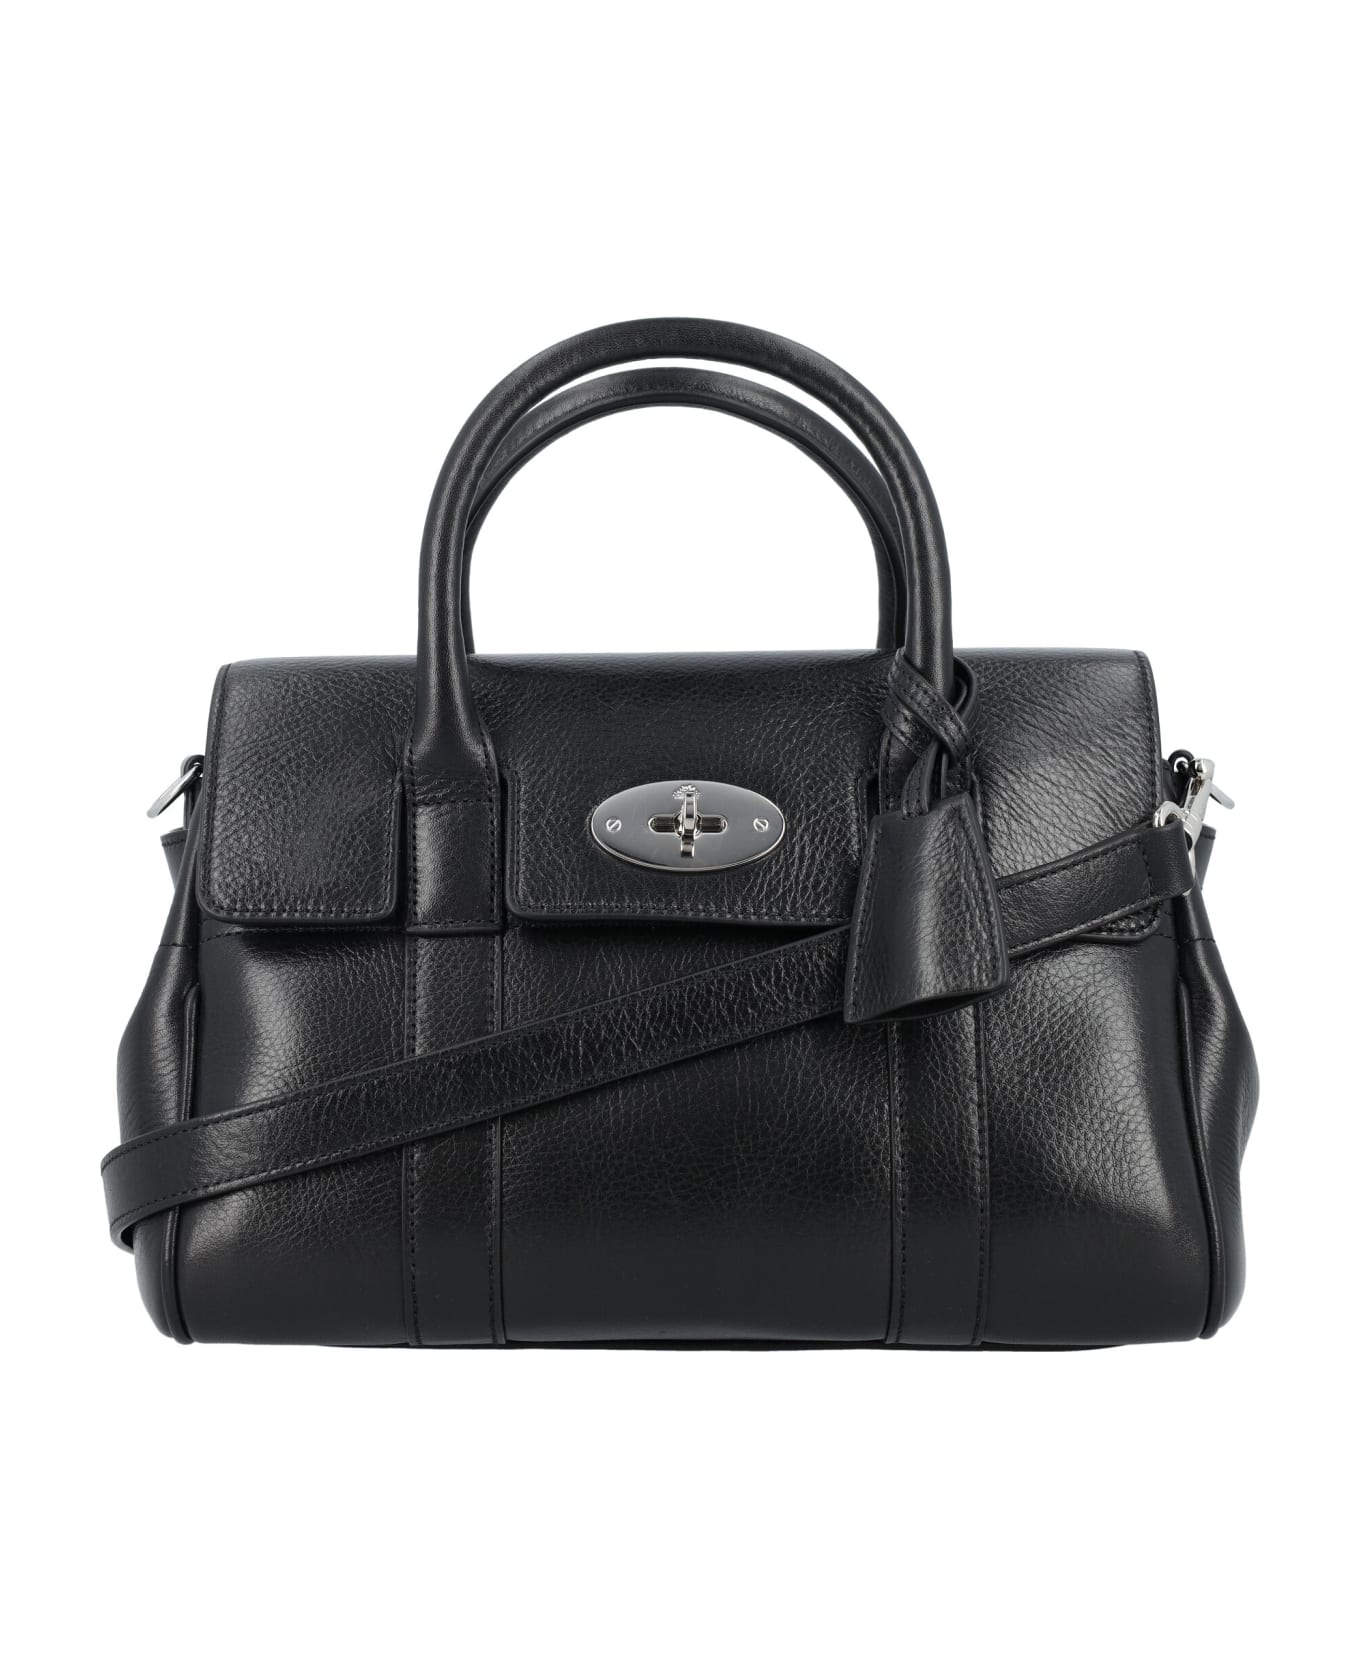 Mulberry Small Bayswater Satchel Bag - BLACK